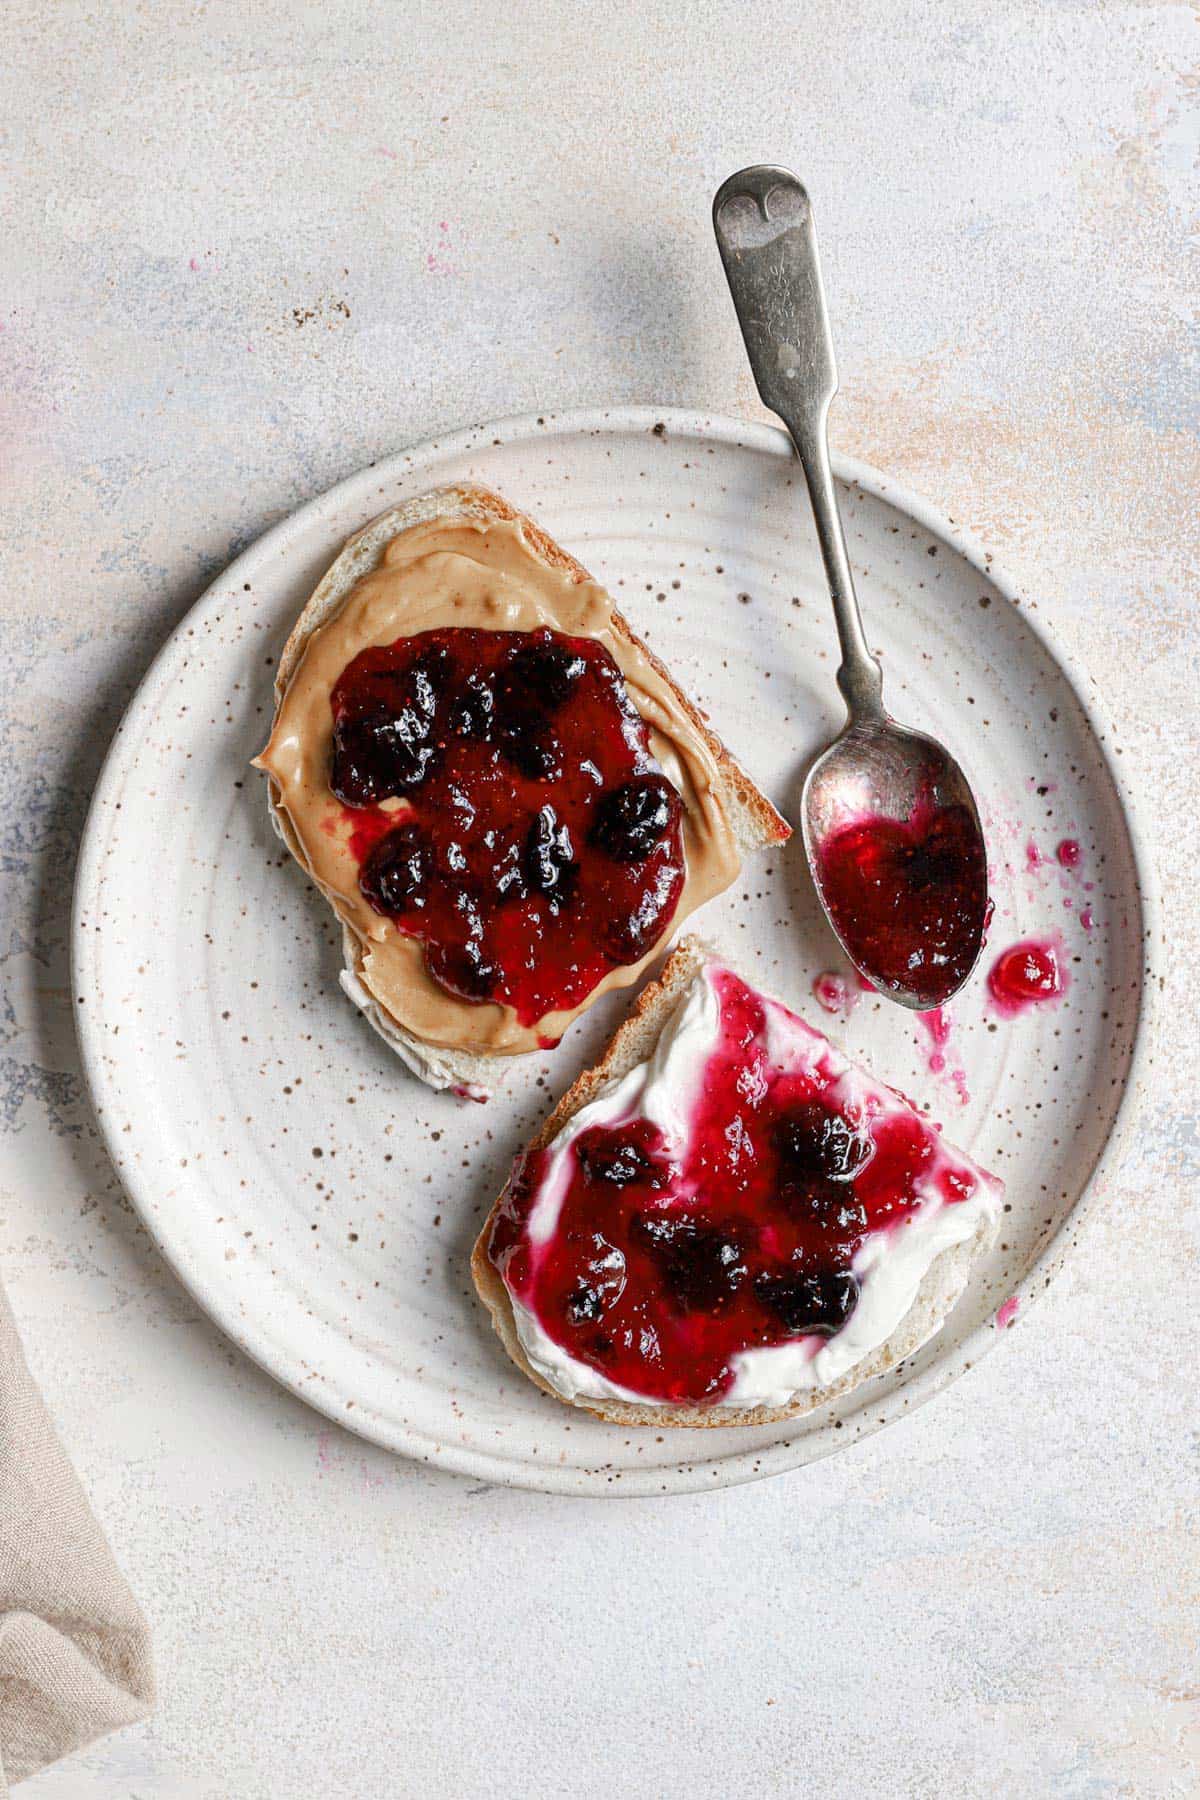 Top down photo of a white plate with two slices of bread topped with blueberry jam and a spoon in the back right.